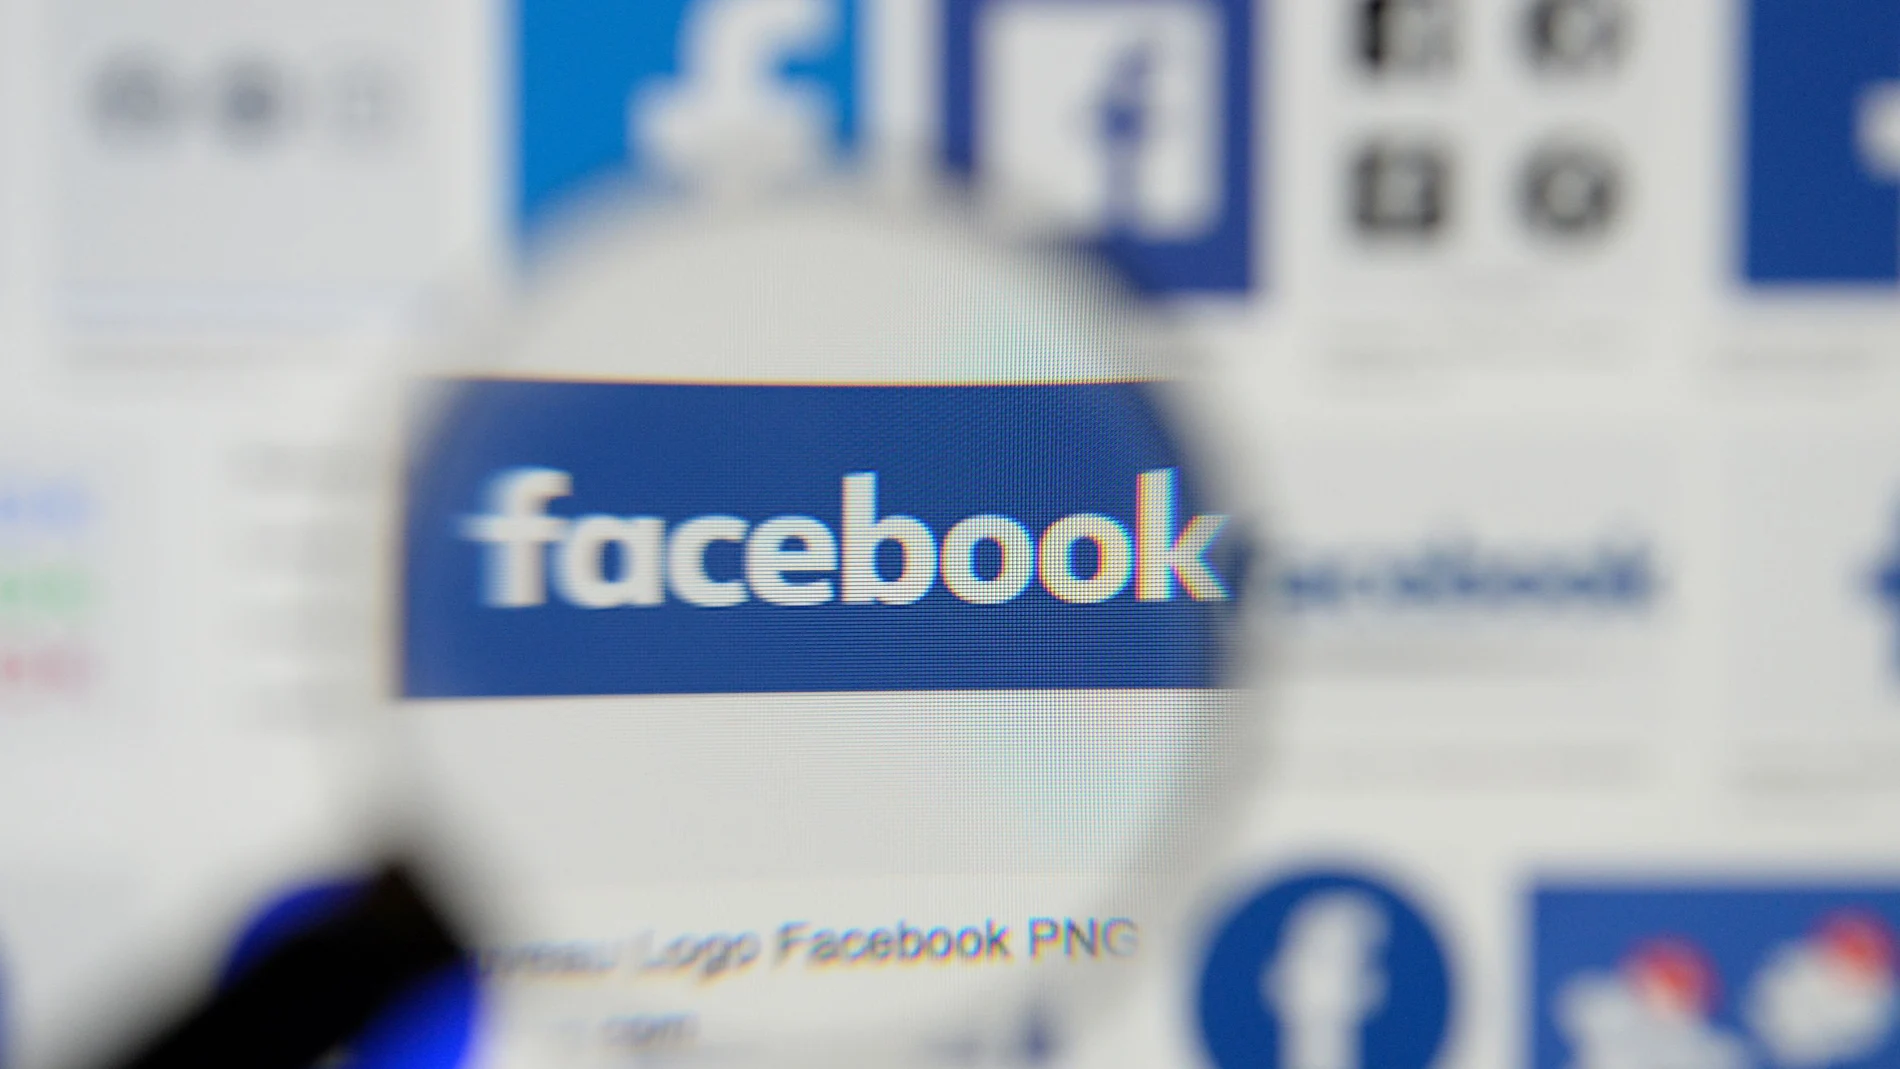 FILE PHOTO: Facebook logos are seen on a screen in this picture illustration taken December 2, 2019. REUTERS/Johanna Geron/Illustration/File Photo